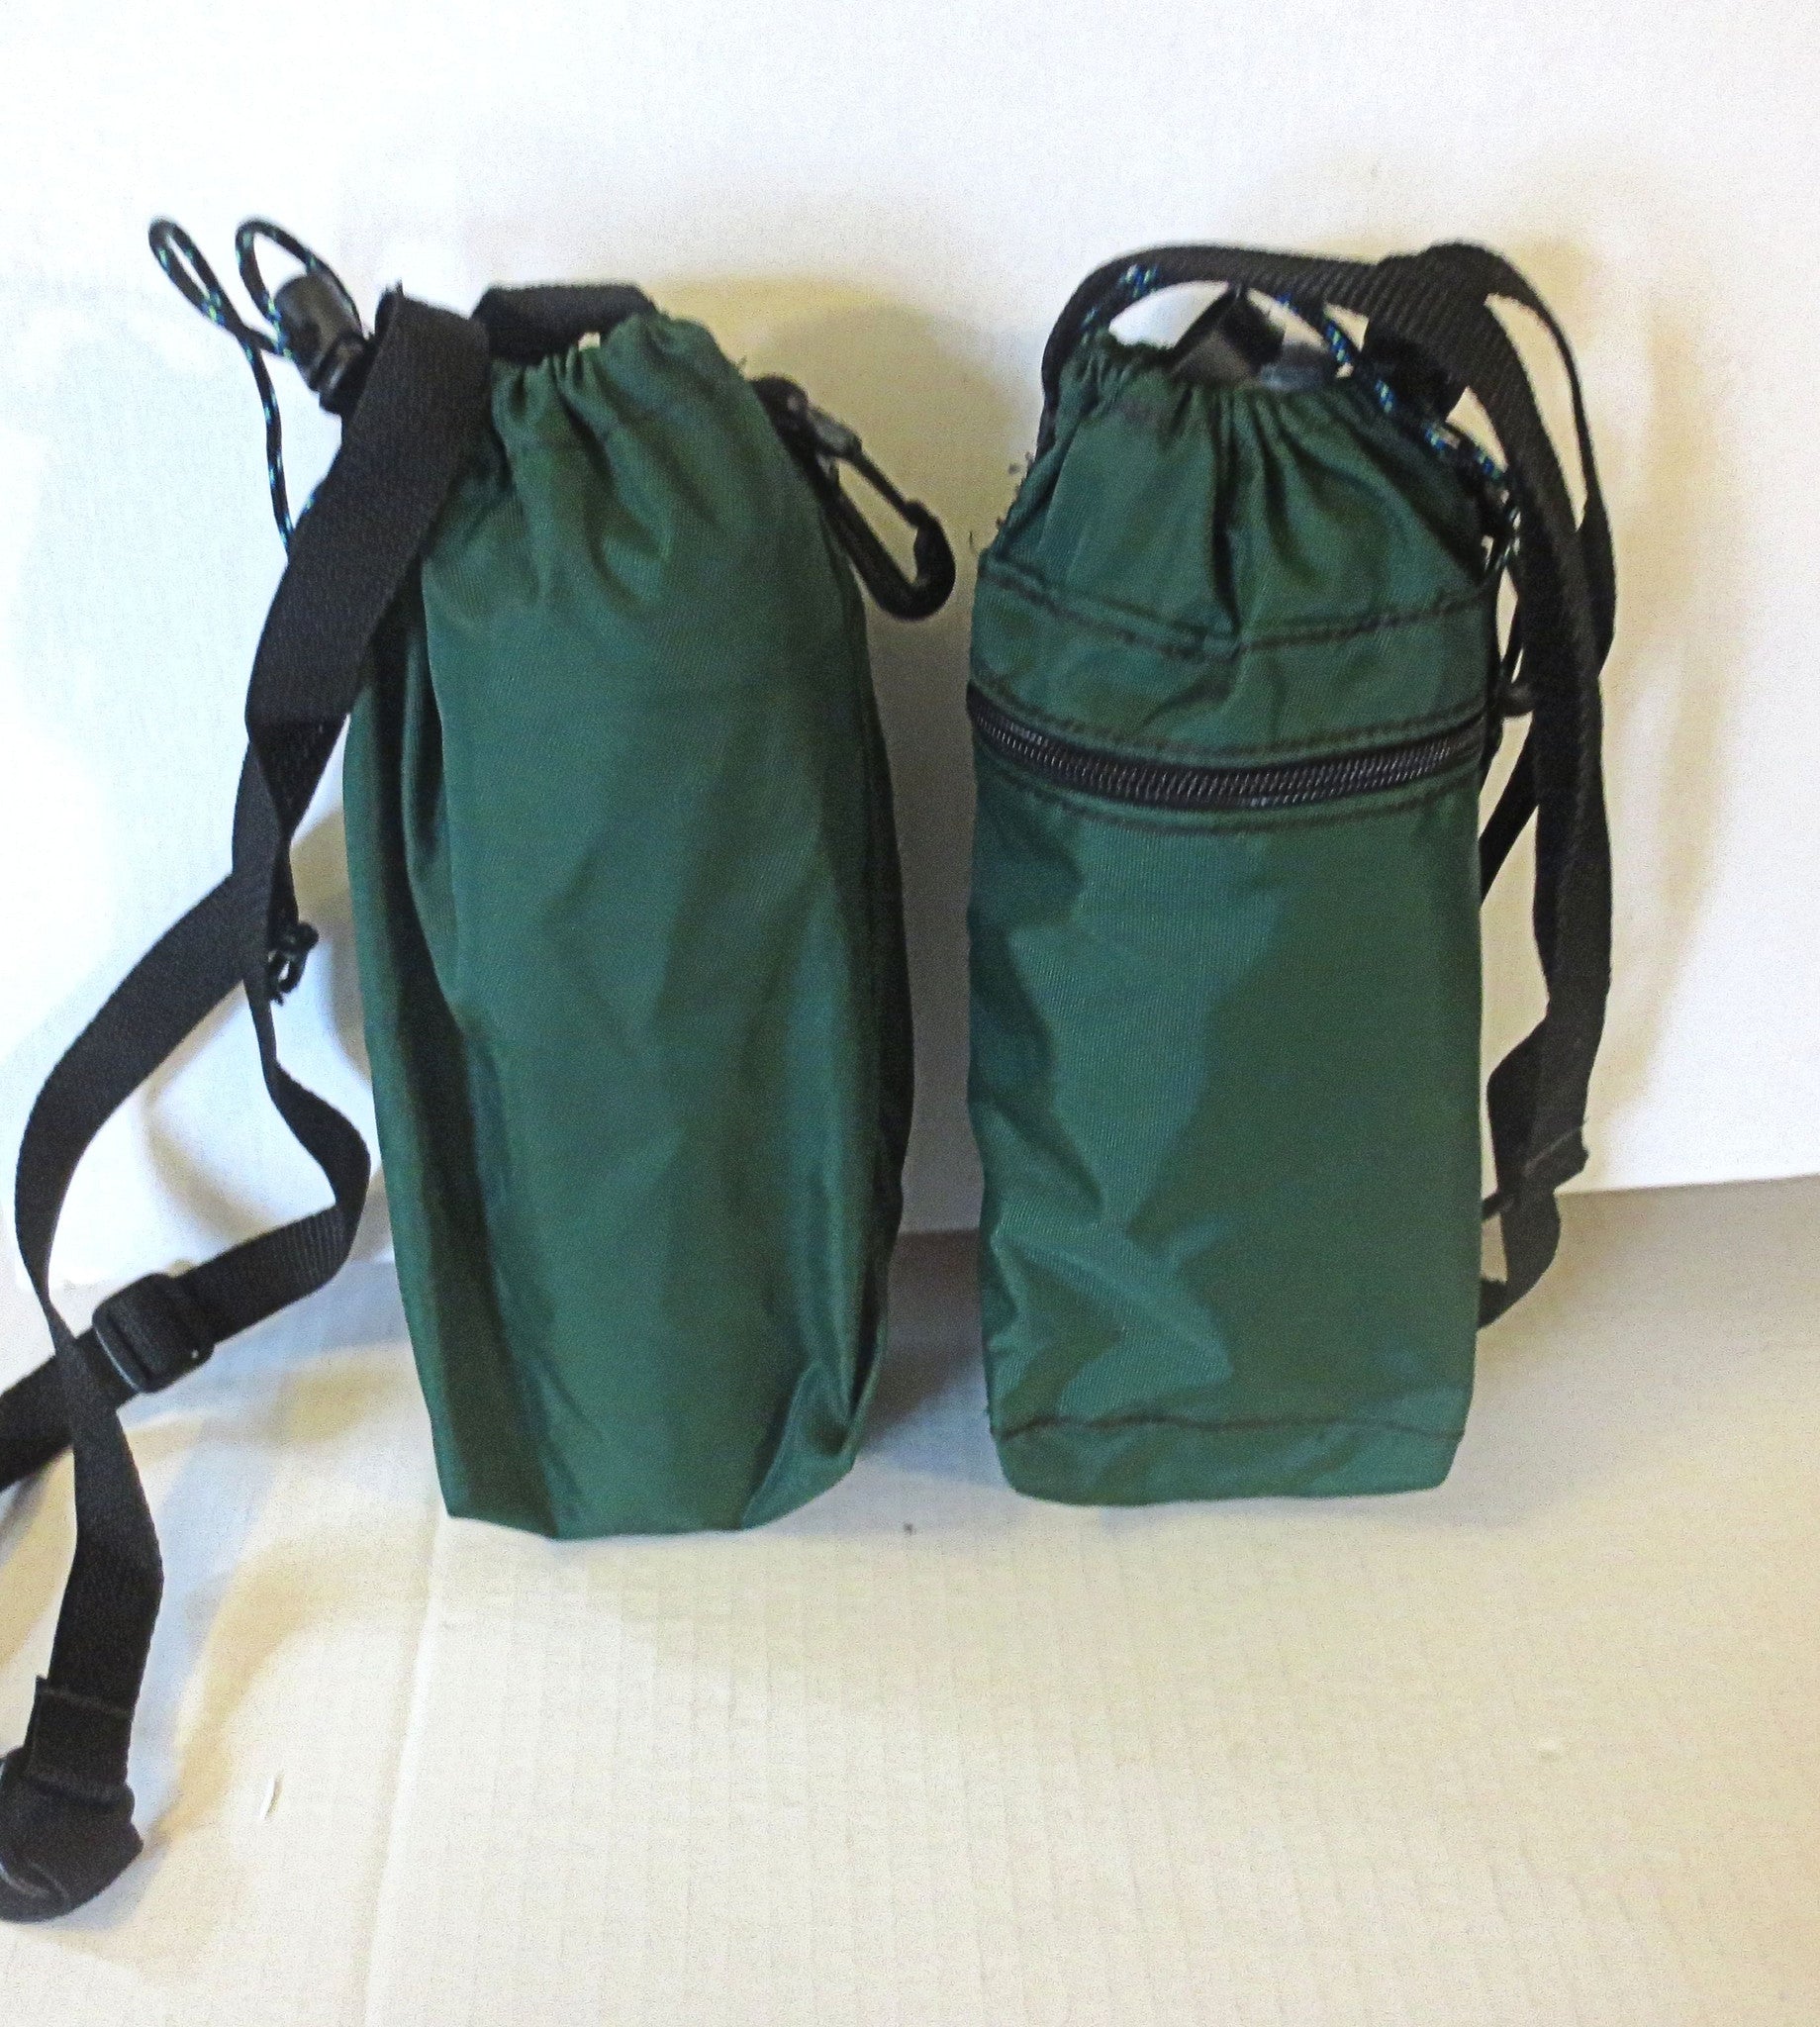 water bottle bag adjustable sling styling great for travel, on the go, staying hydrated